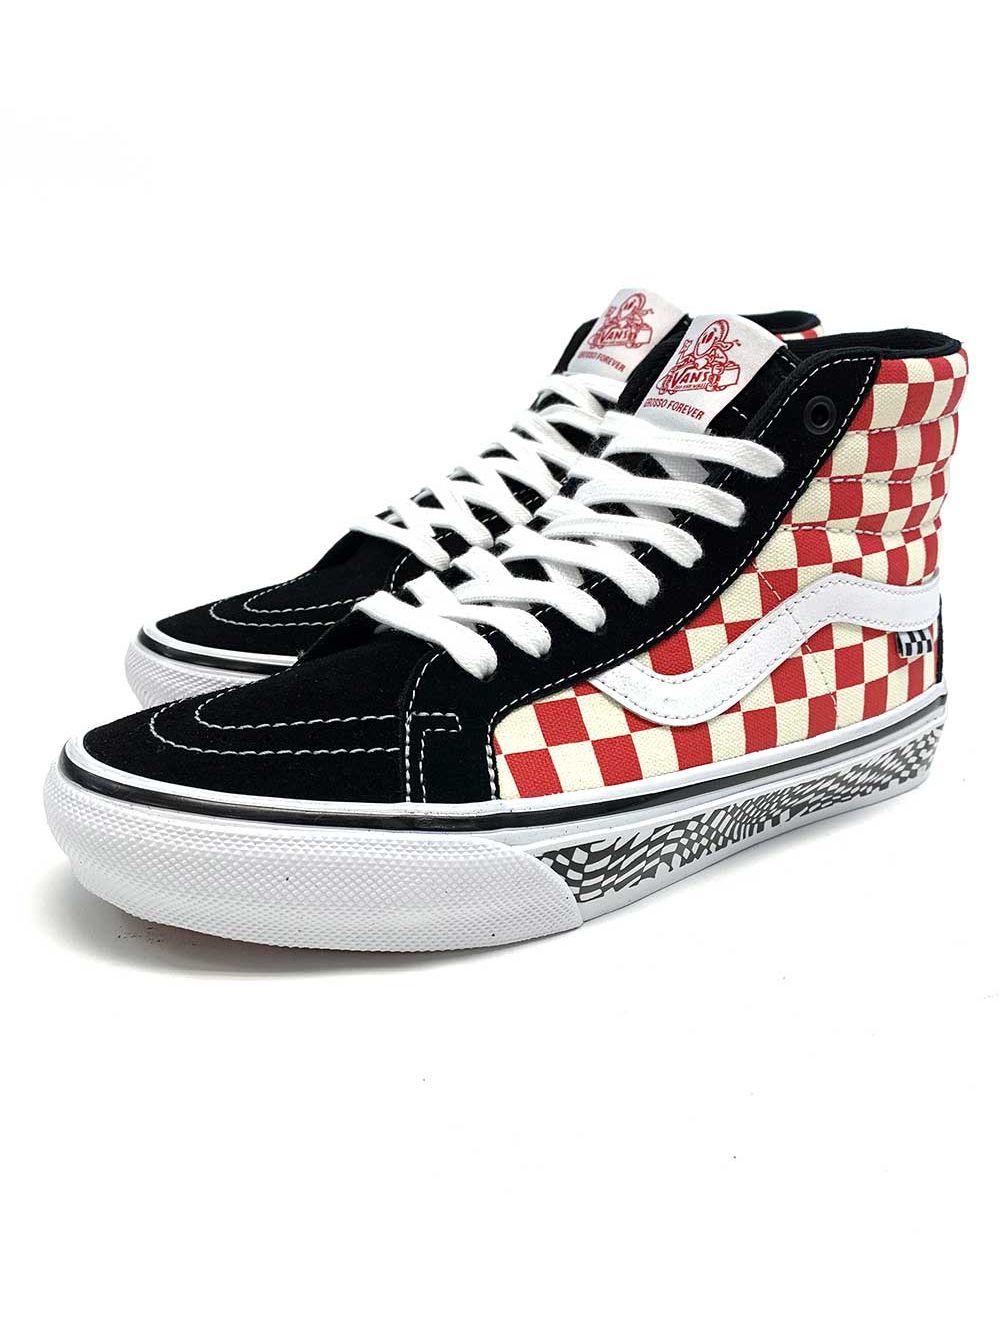 black and red high top vans